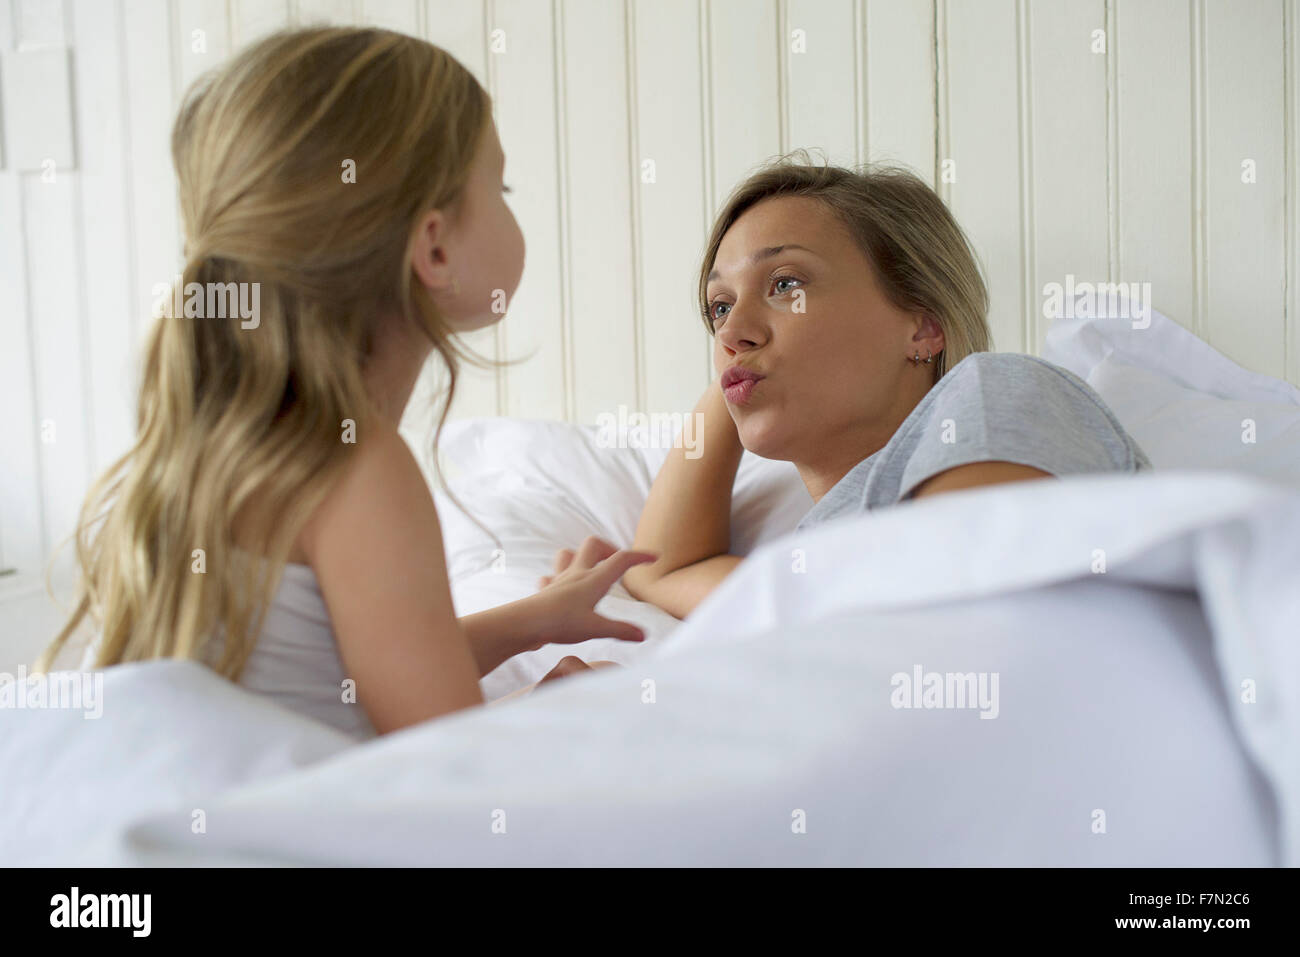 Mother and daughter making faces Stock Photo